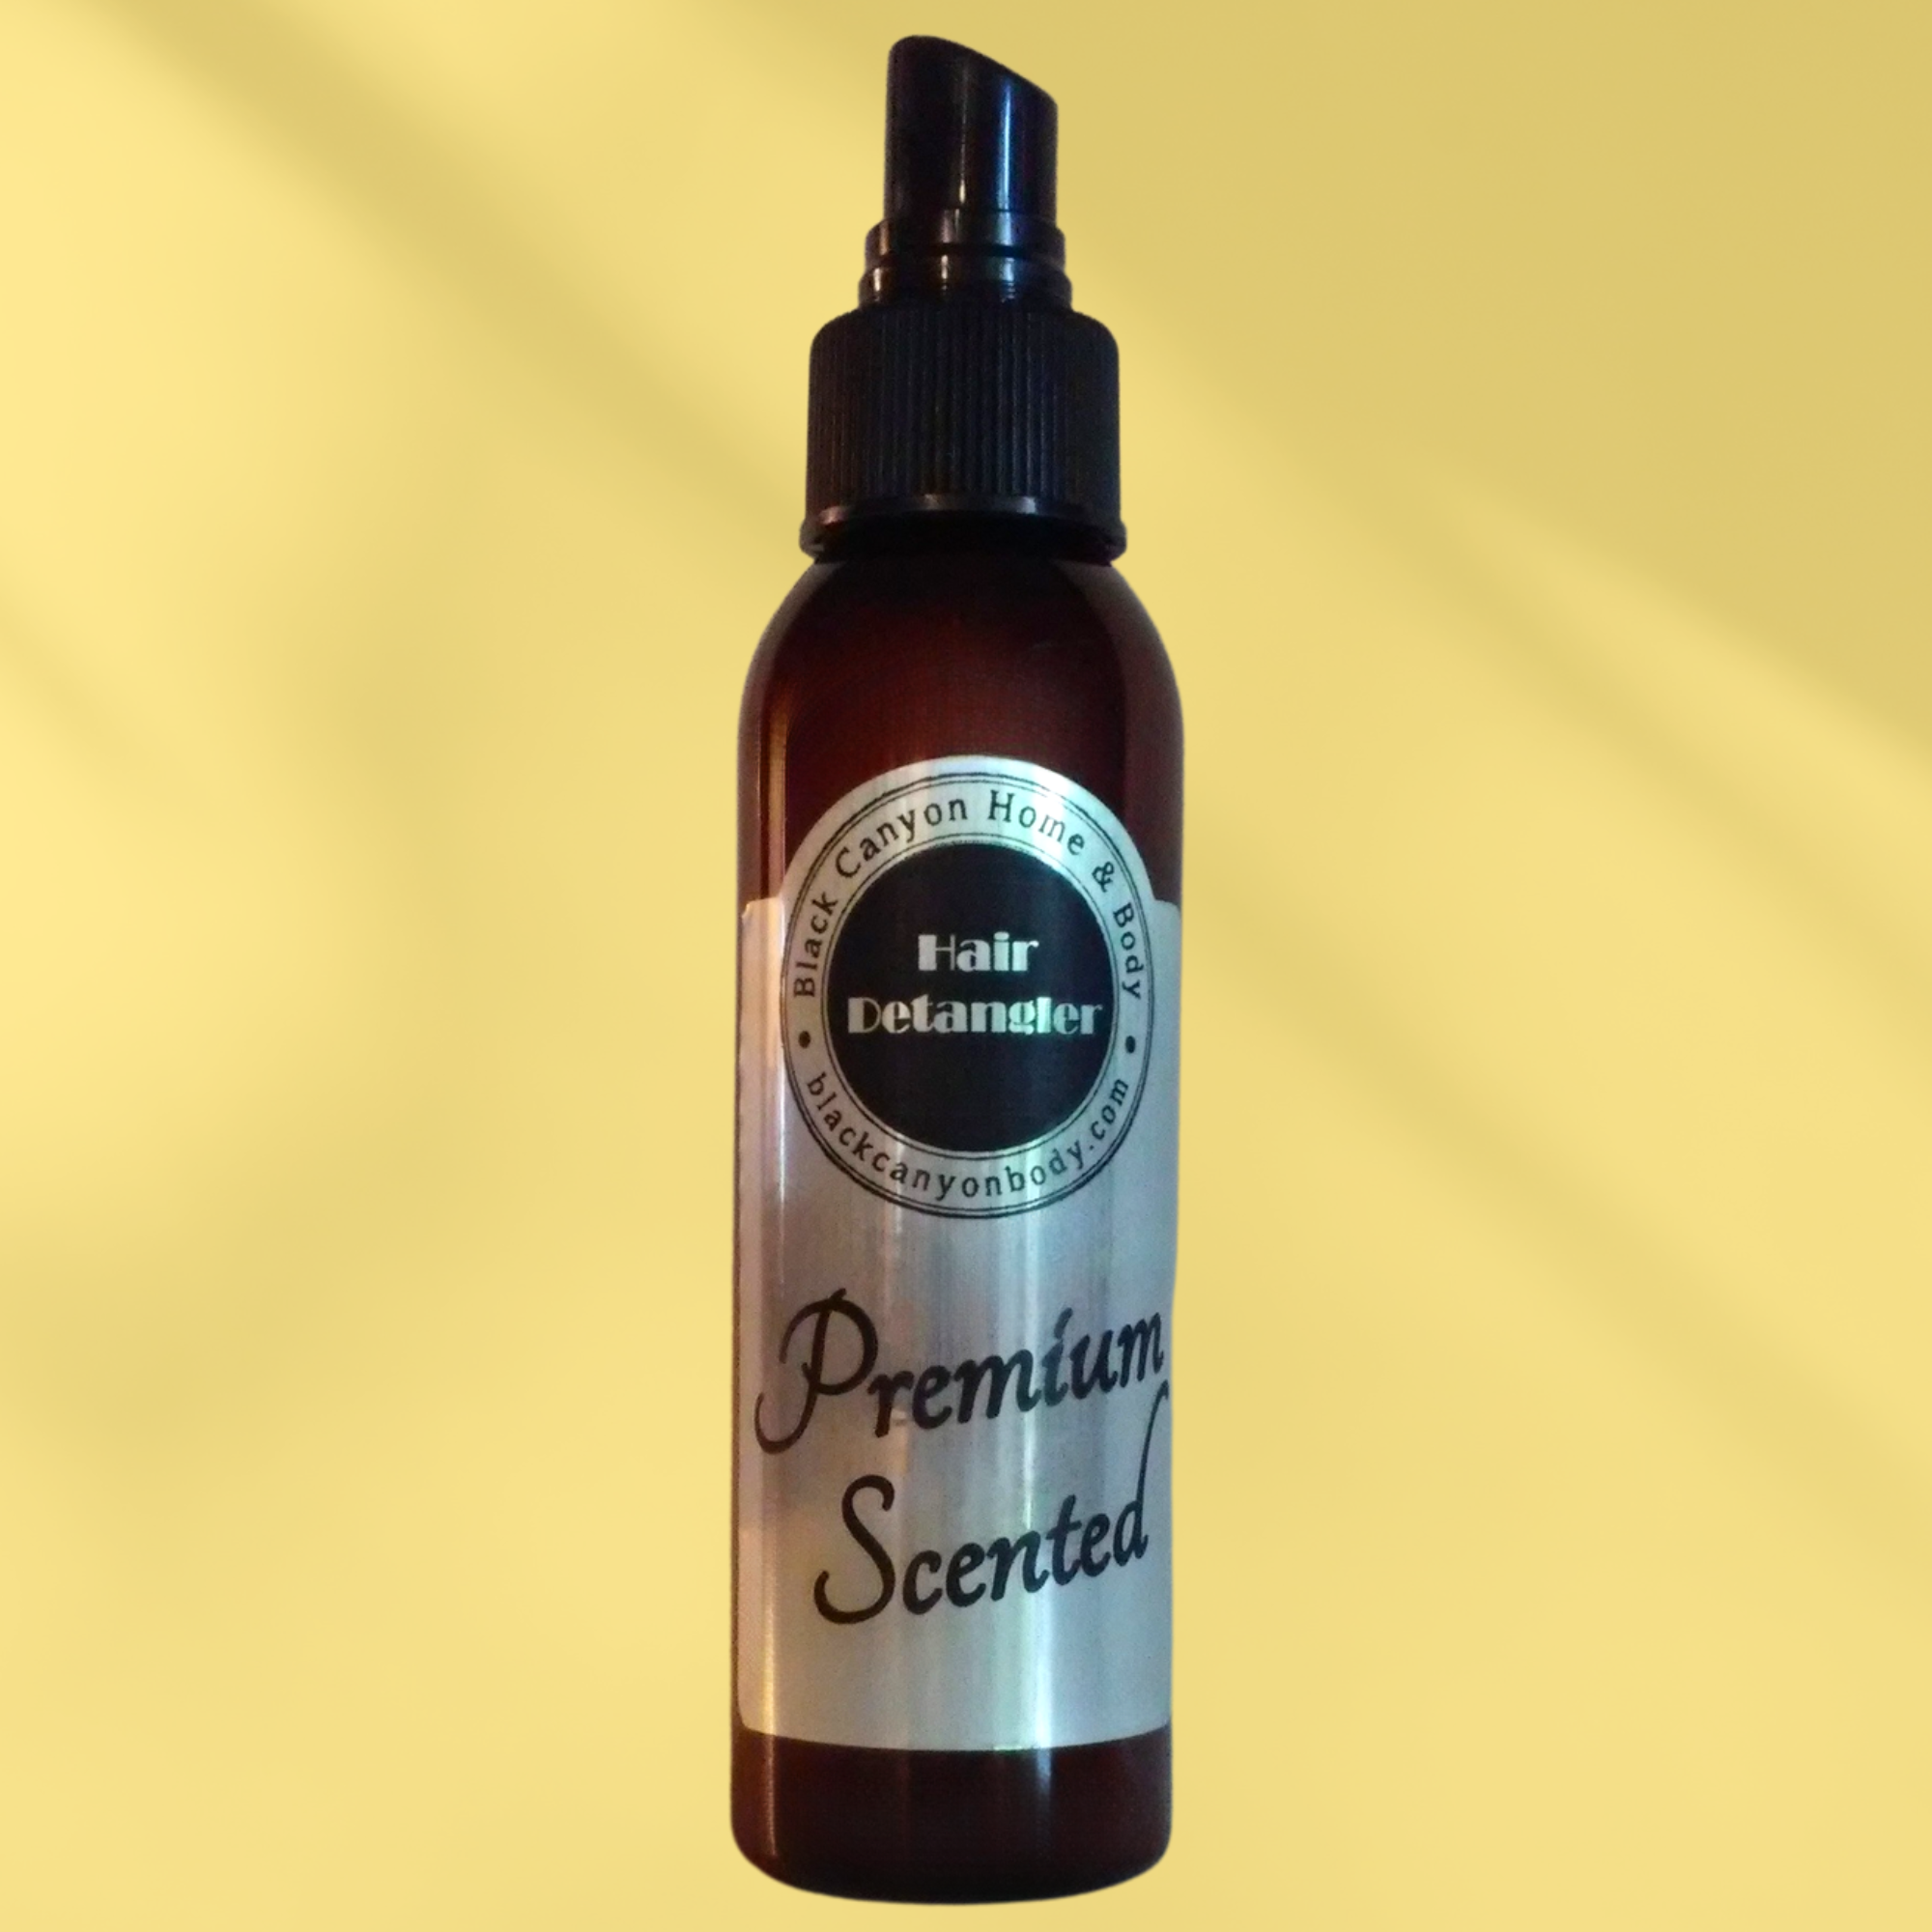 Black Canyon Green Tea & Amber Scented Hair Detangler Spray with Olive Oil